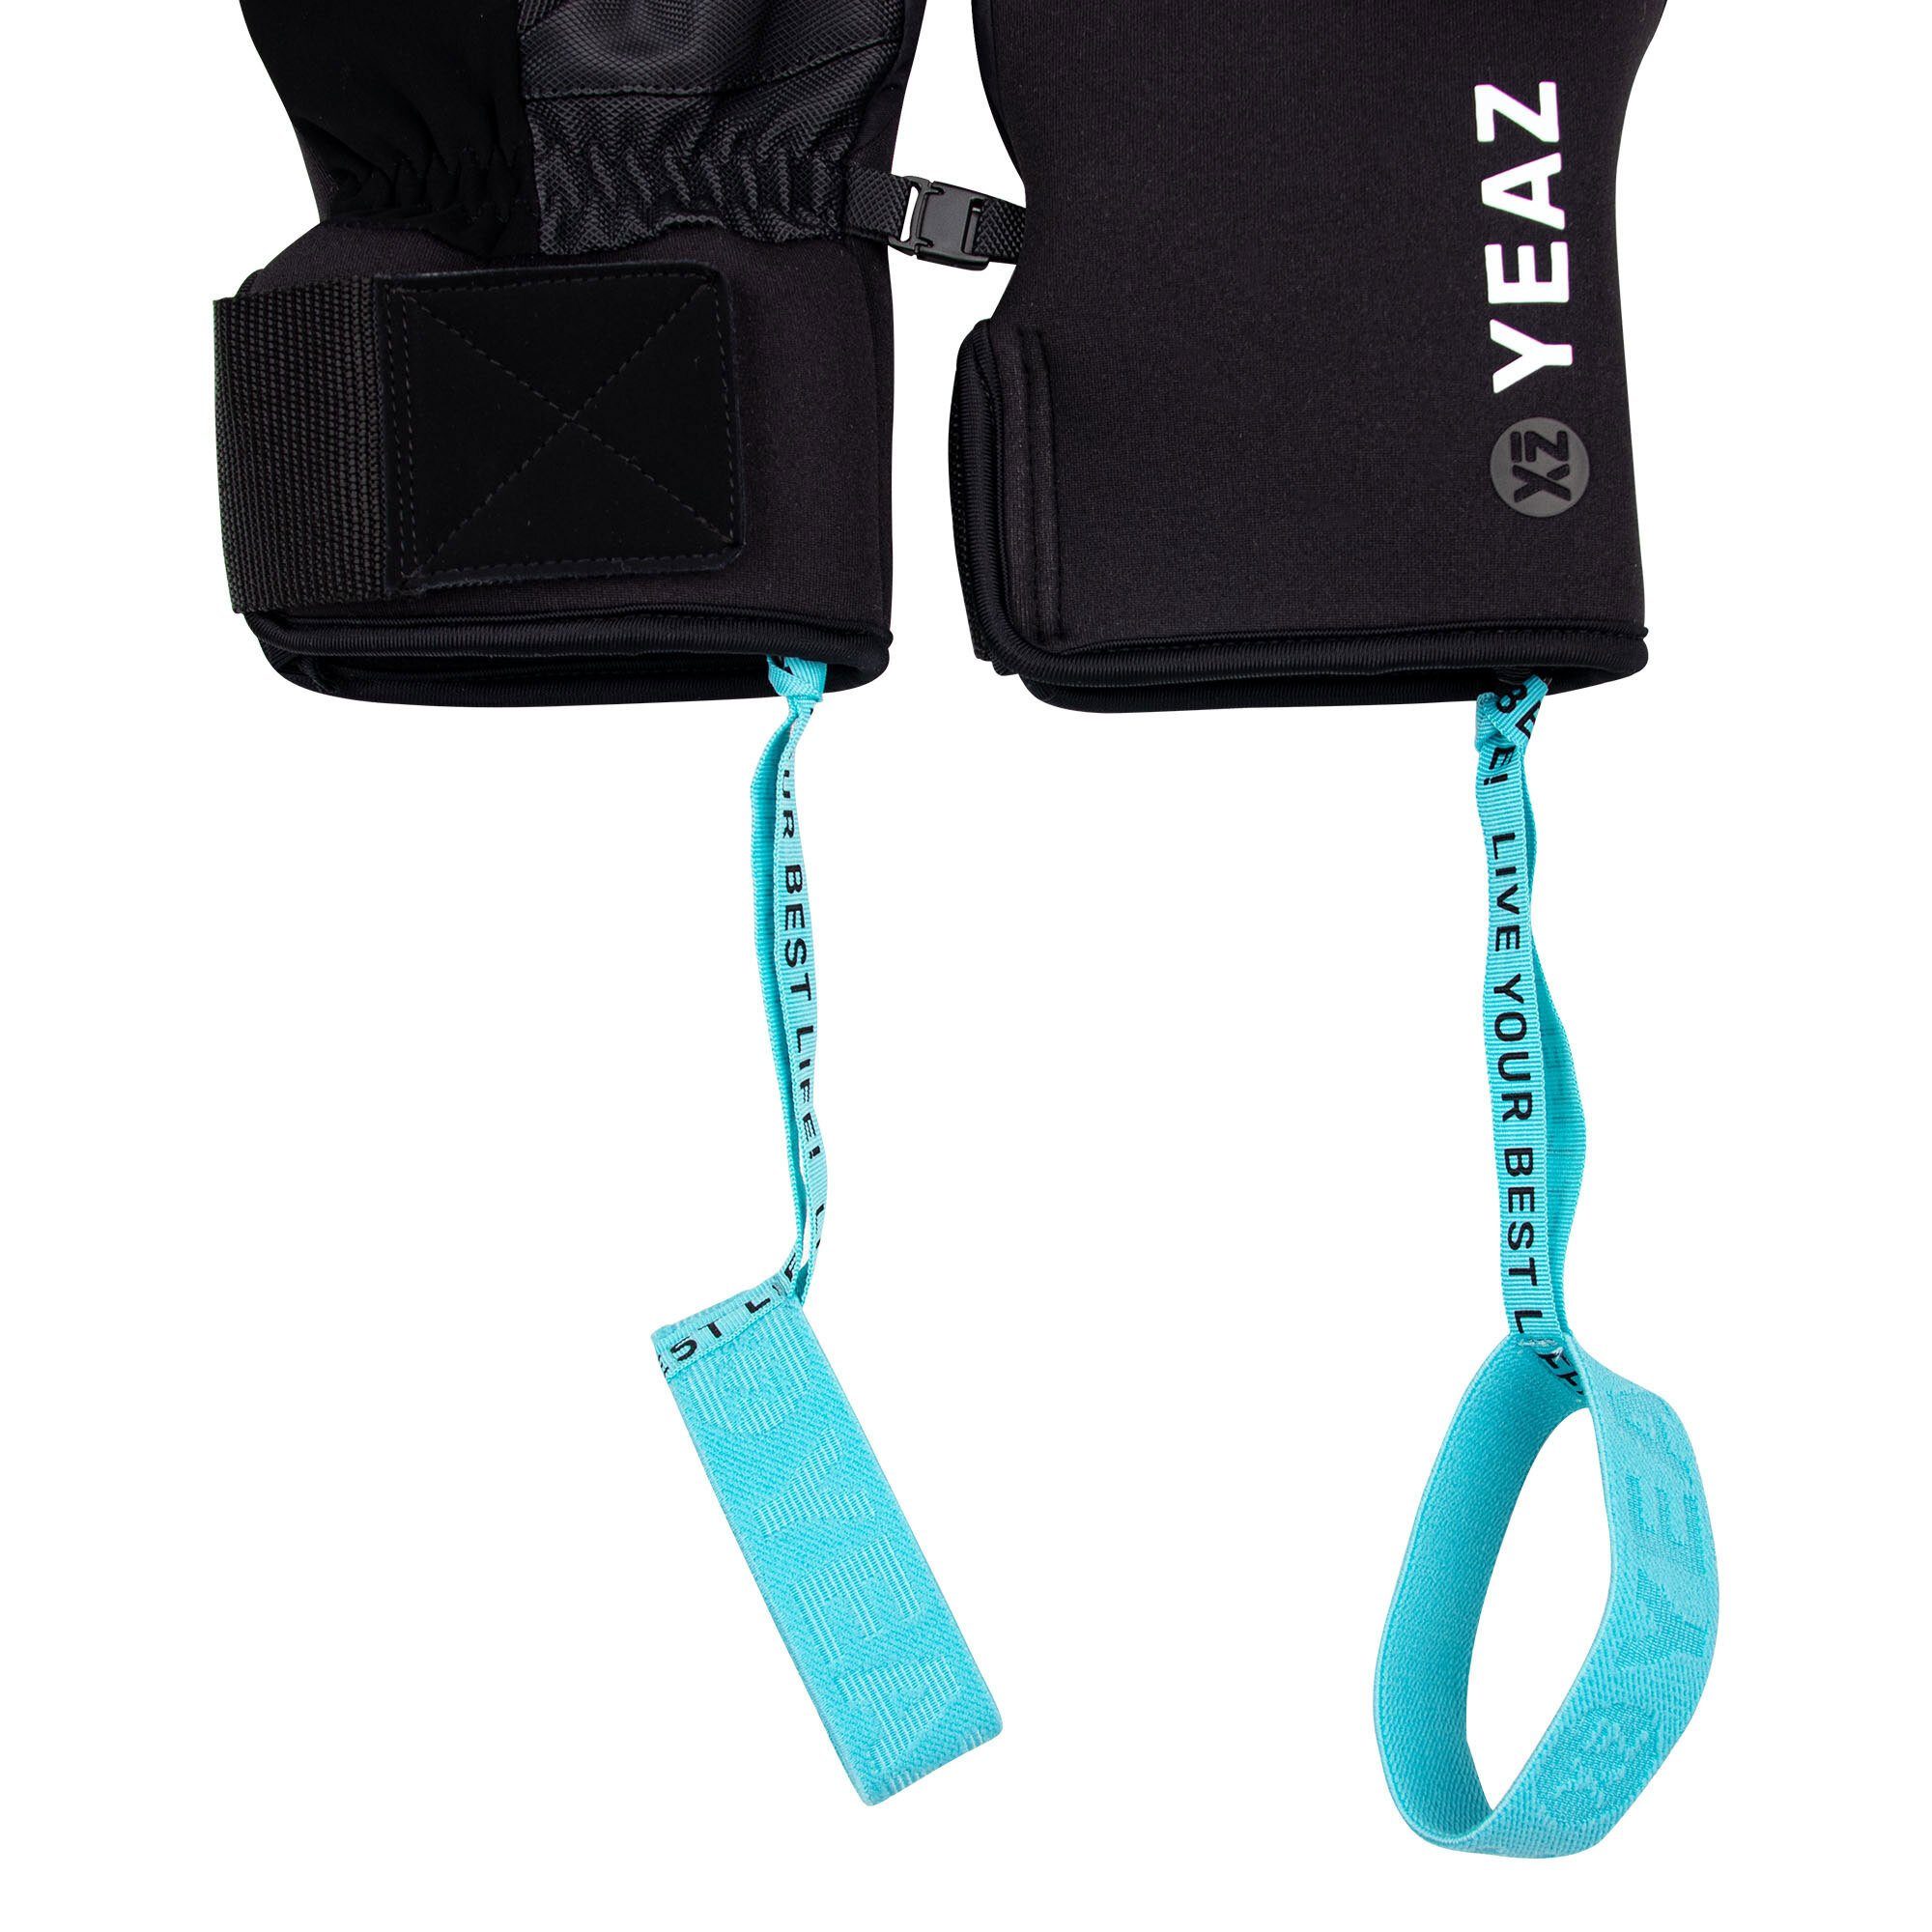 YEAZ Skihandschuhe POW fausthandschuhe Wrist-Band & Touch-Funktion